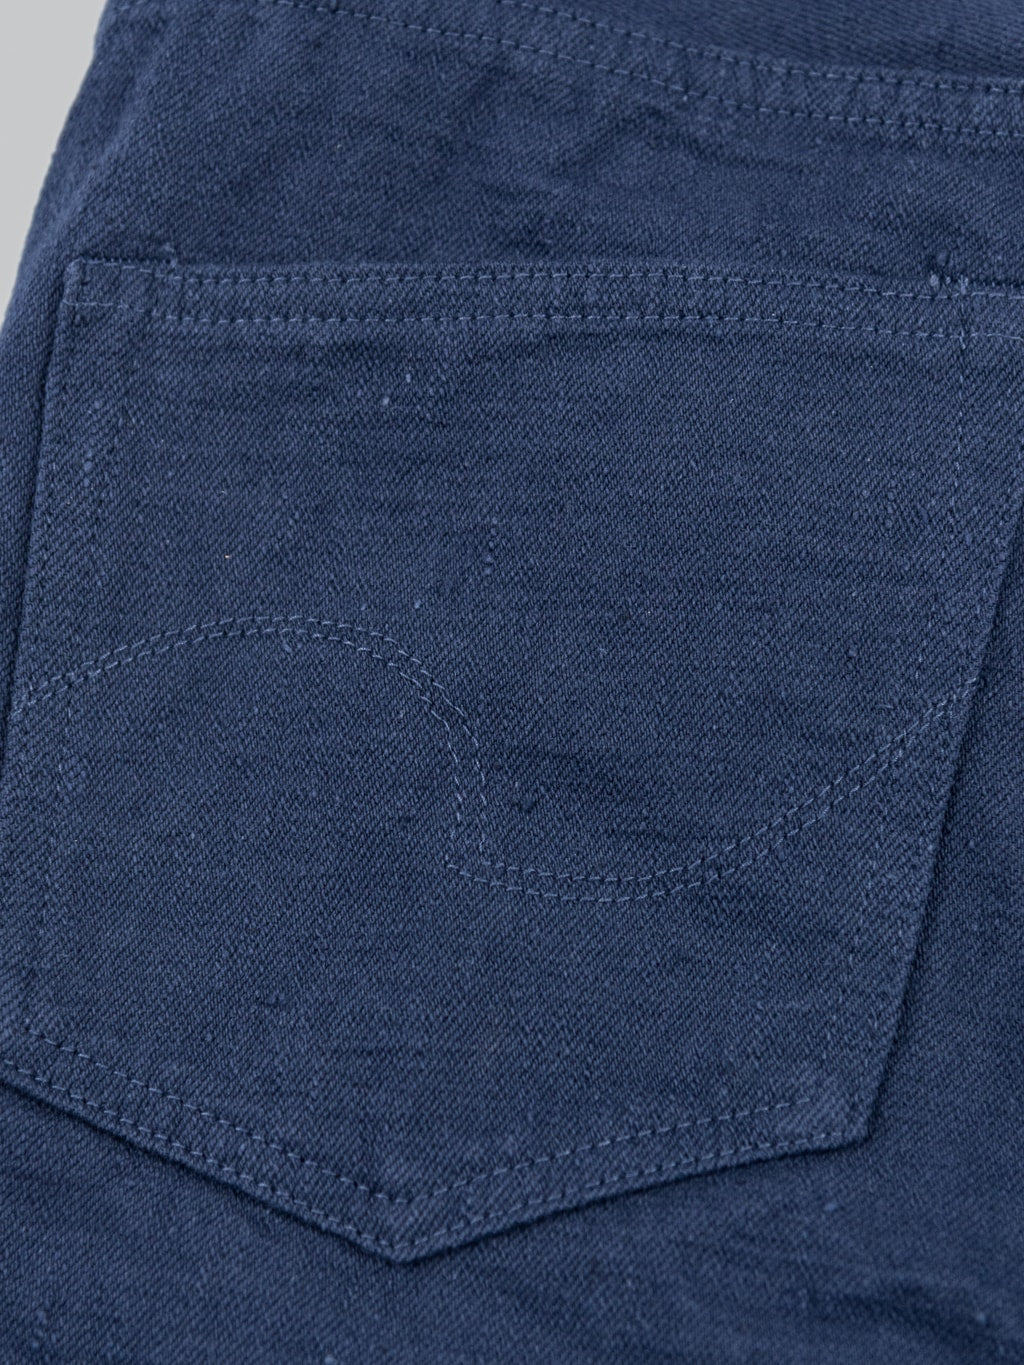 ONI Denim 612 Super Low Tension Navy Relaxed Tapered Jeans pocket stitchin